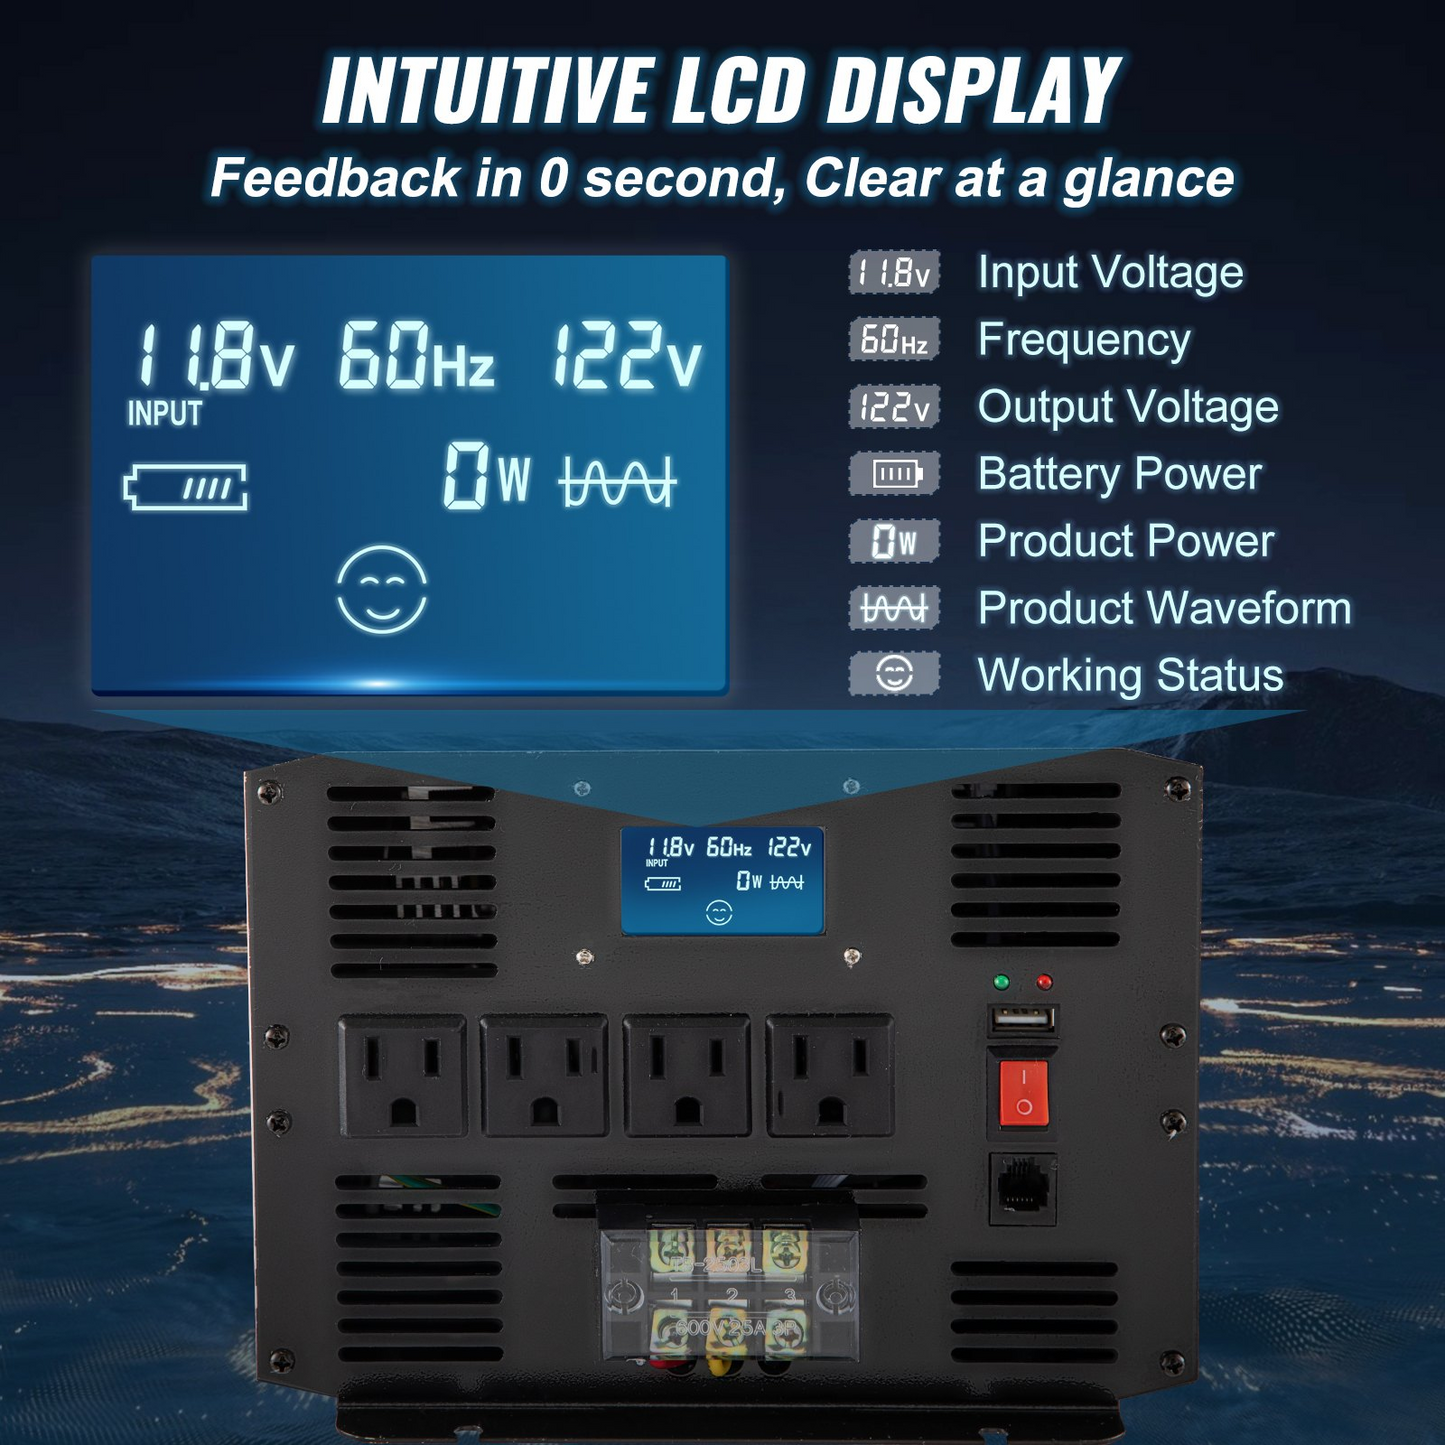 VEVOR Pure Sine Wave Inverter 3500 Watt Power Inverter, DC 12V to AC 120V Car Inverter, with USB Port LCD Display Remote Controller and AC Outlets (GFCI), for RV Truck Car Solar System Travel Camping, Goodies N Stuff